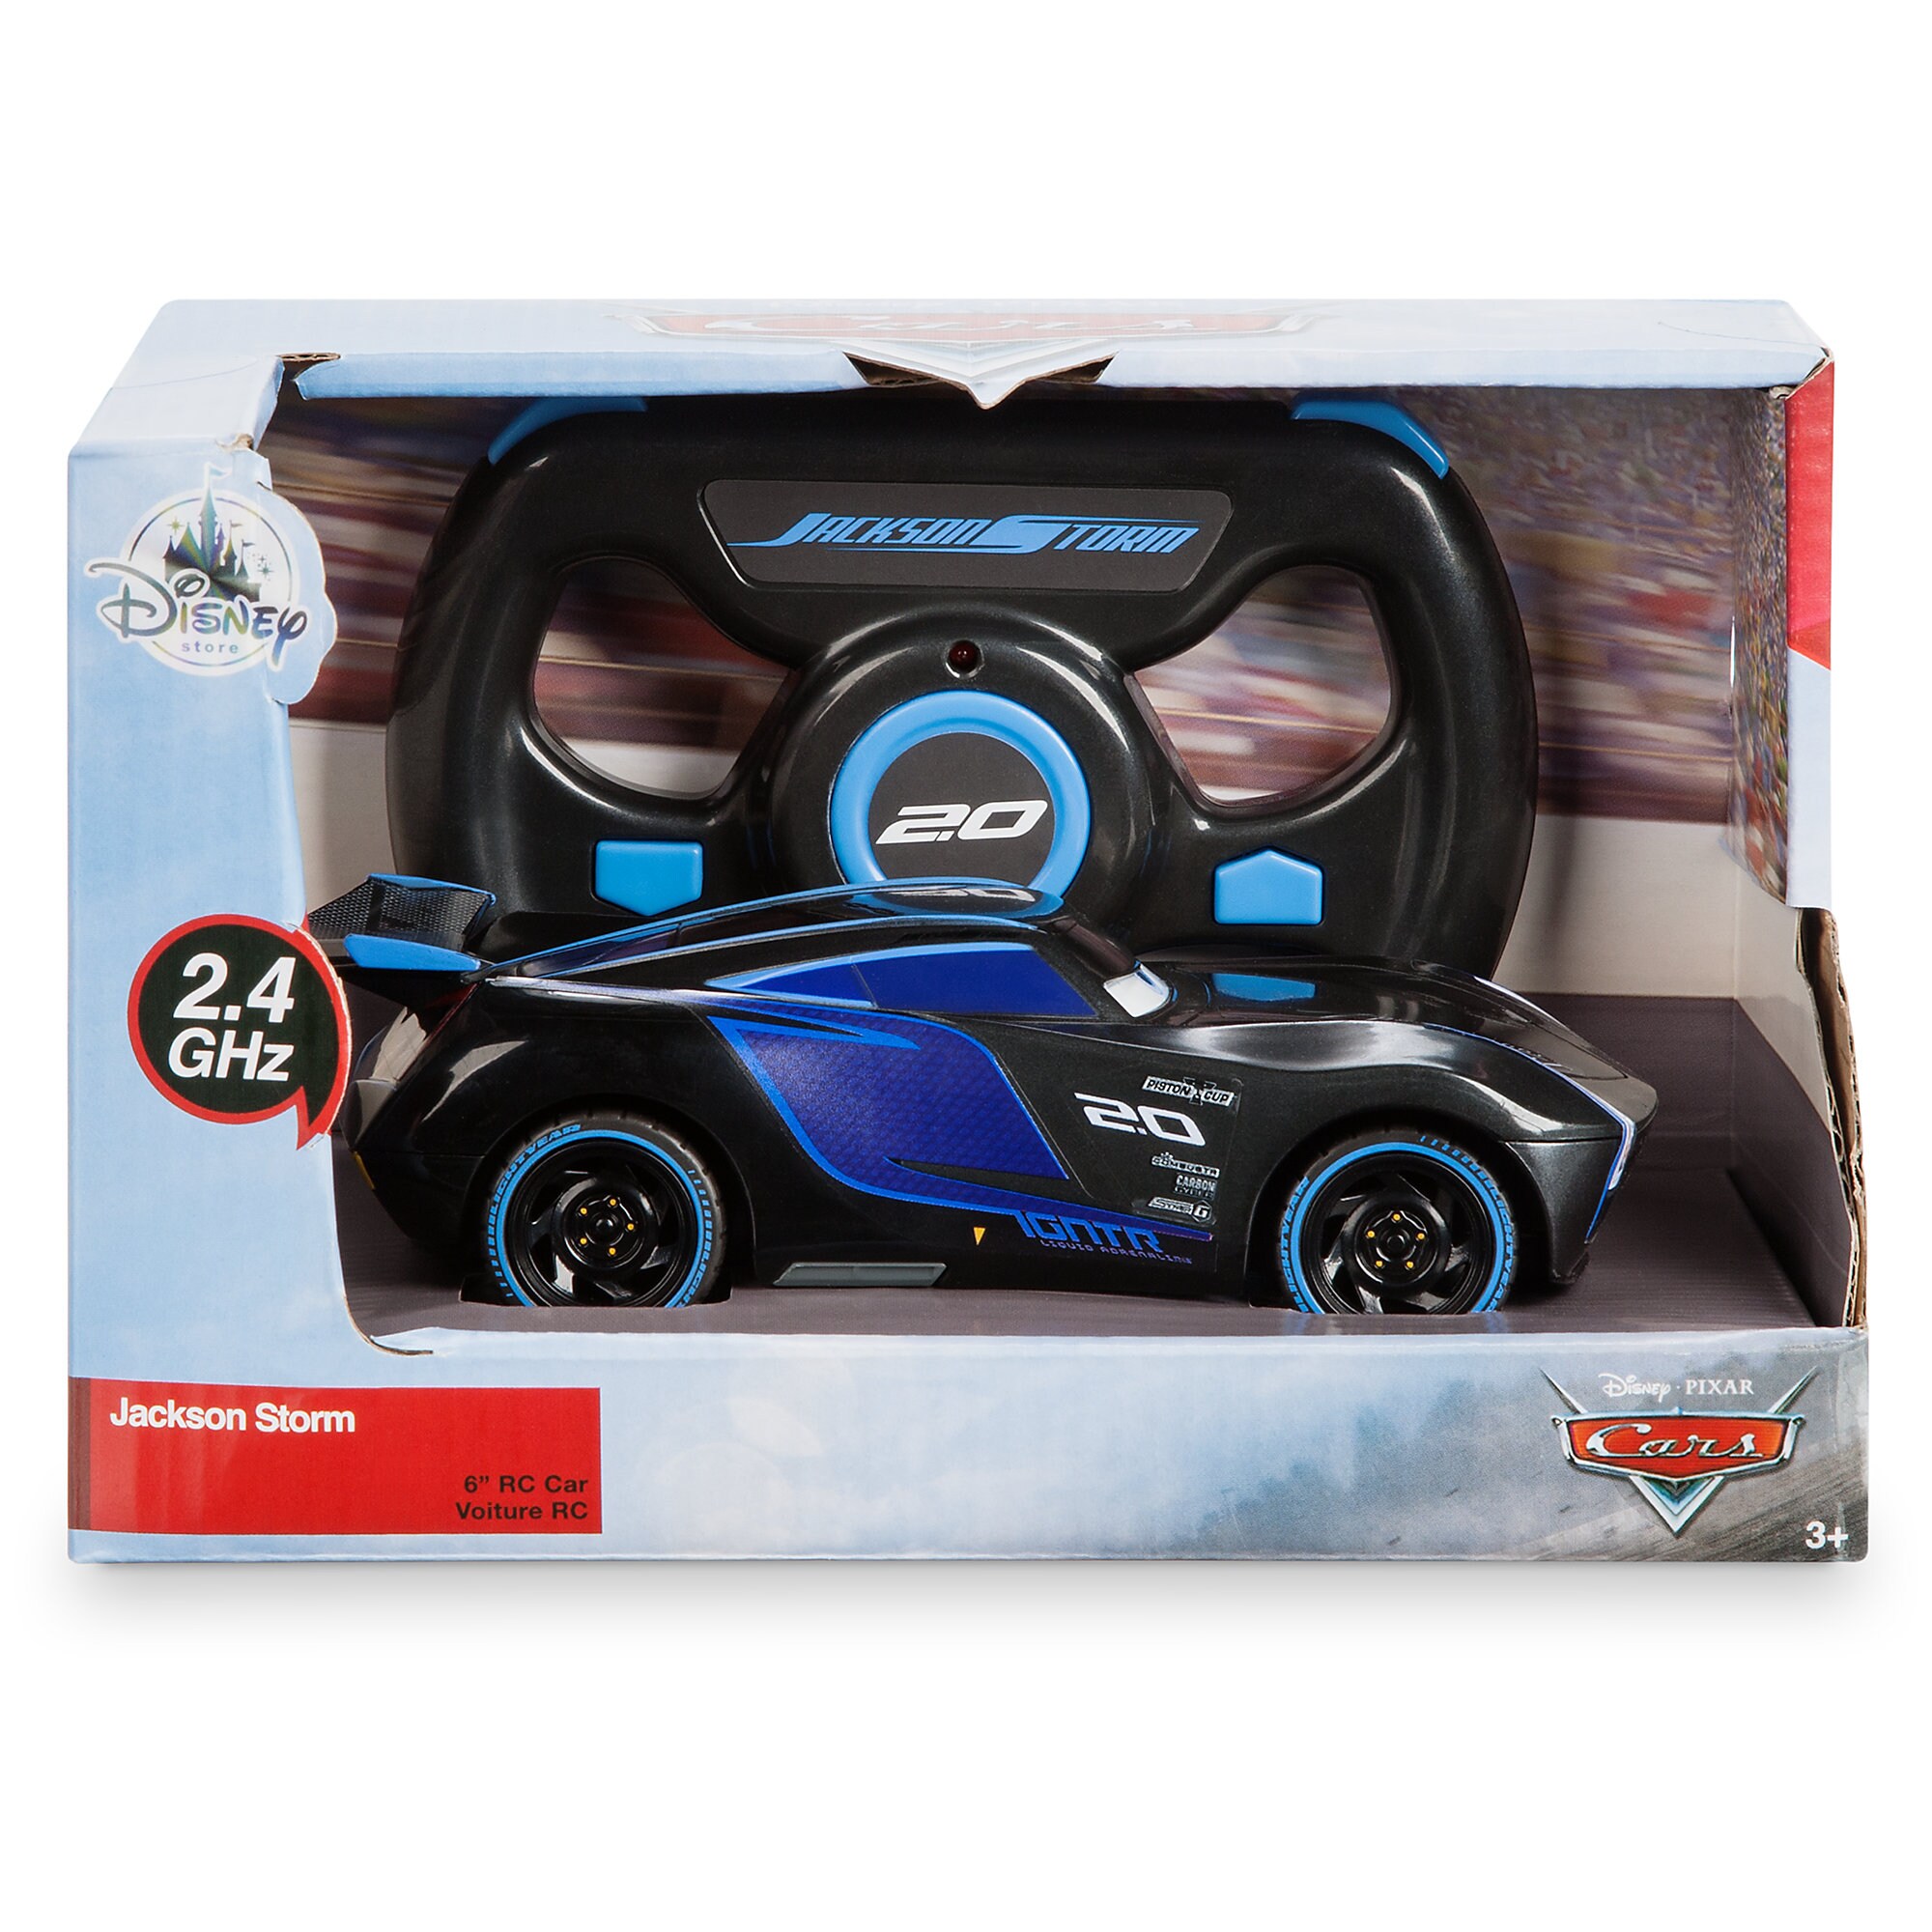 jackson storm remote control vehicle  cars 3 has hit the